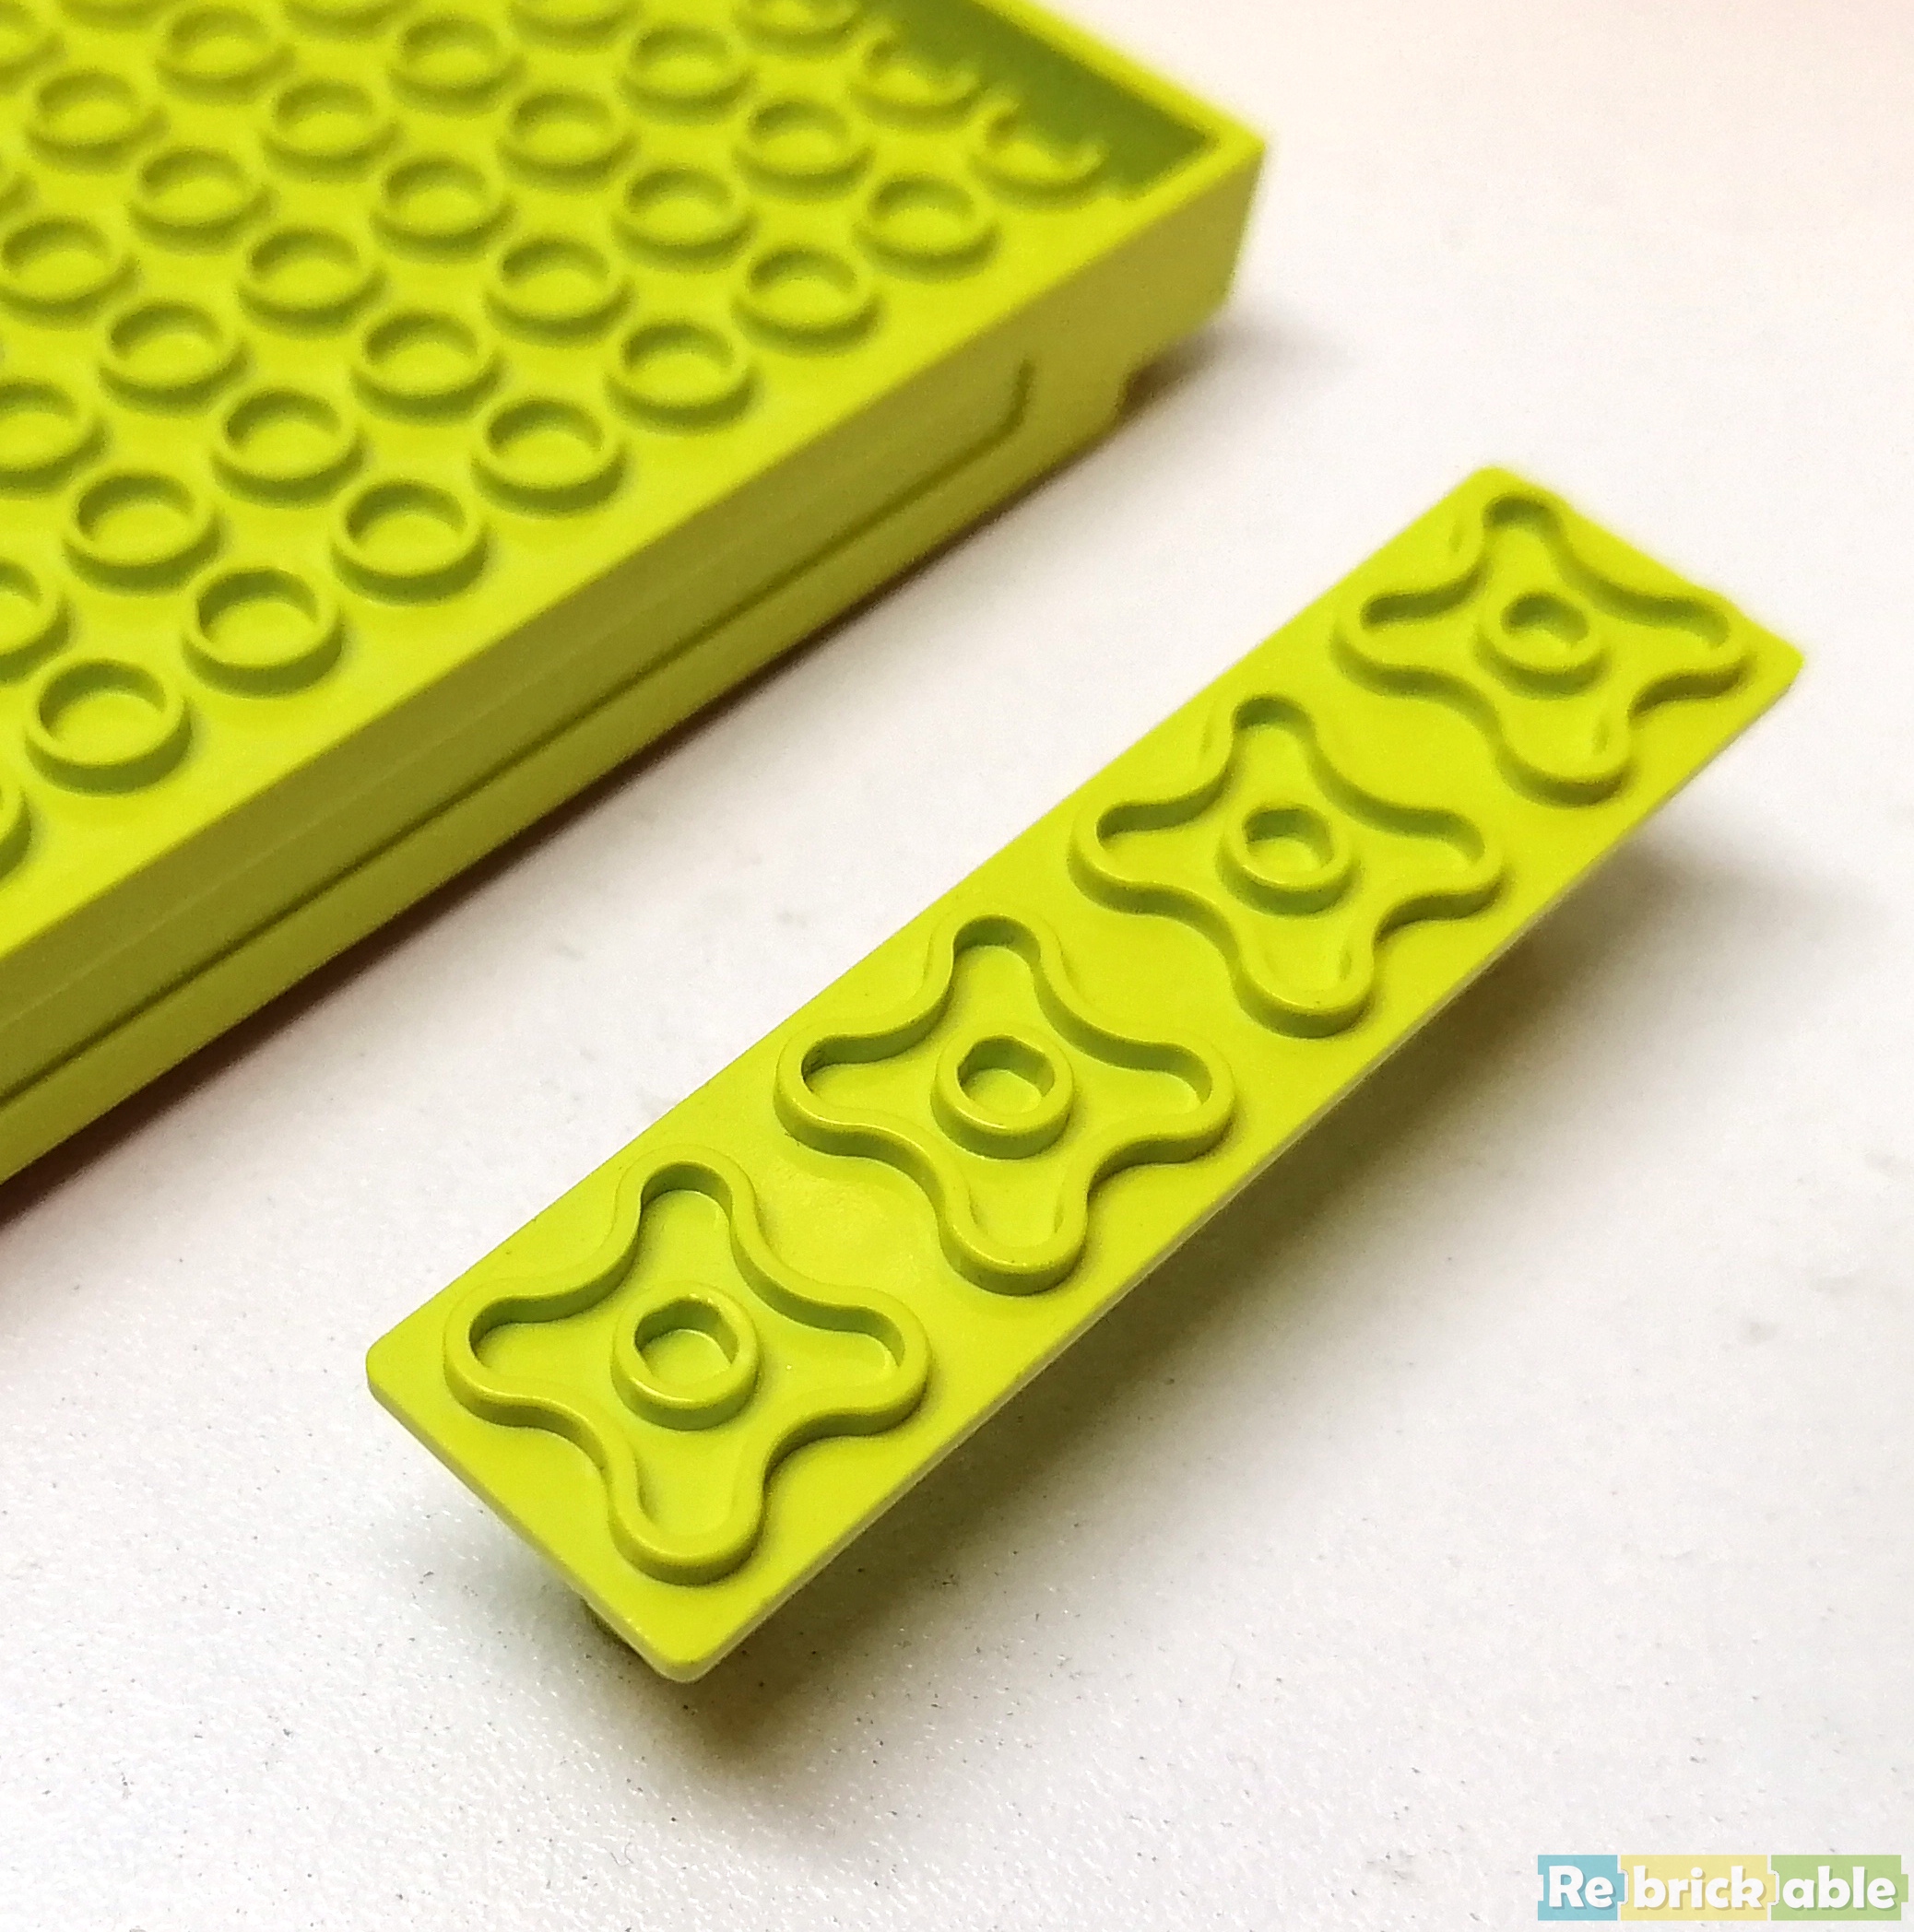 New LEGO Lot of 4 Lime Green 4x4 Rounded Corner Plates Friends Girls Pieces 